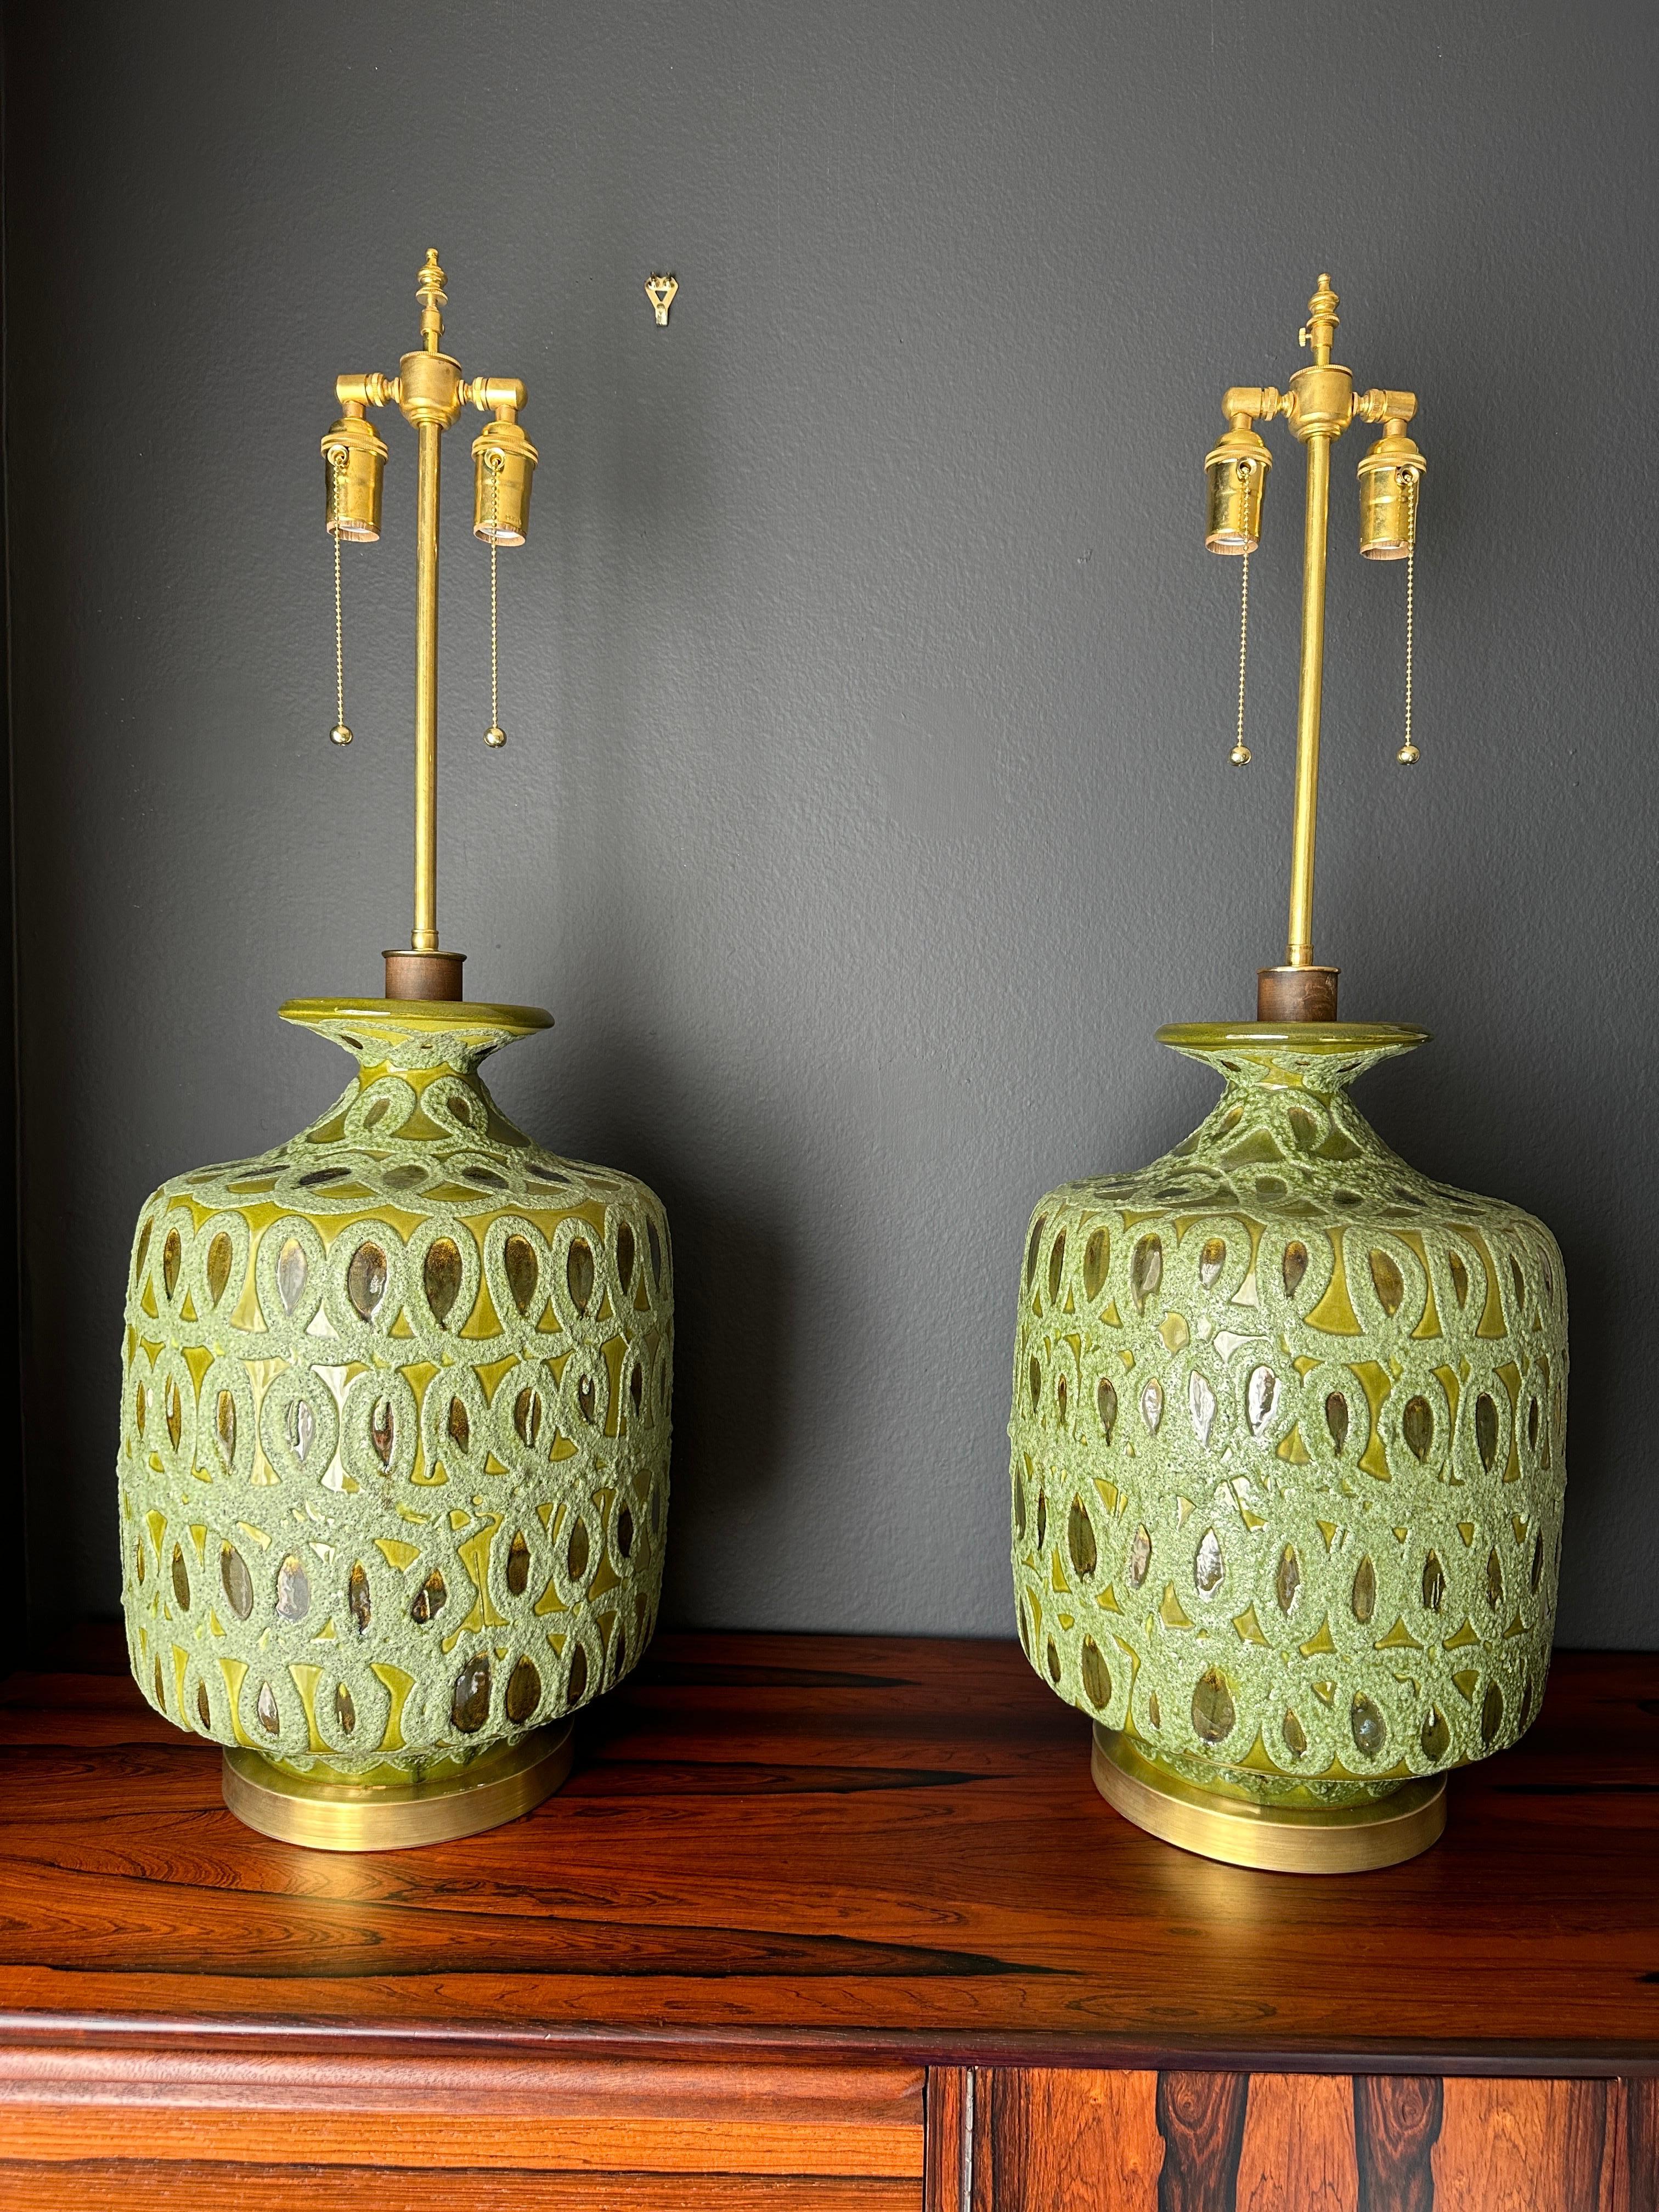 Pair of green glazed Mid-Century Modern ceramic lamps with brass bases. Requires two up to 60watt bulbs.